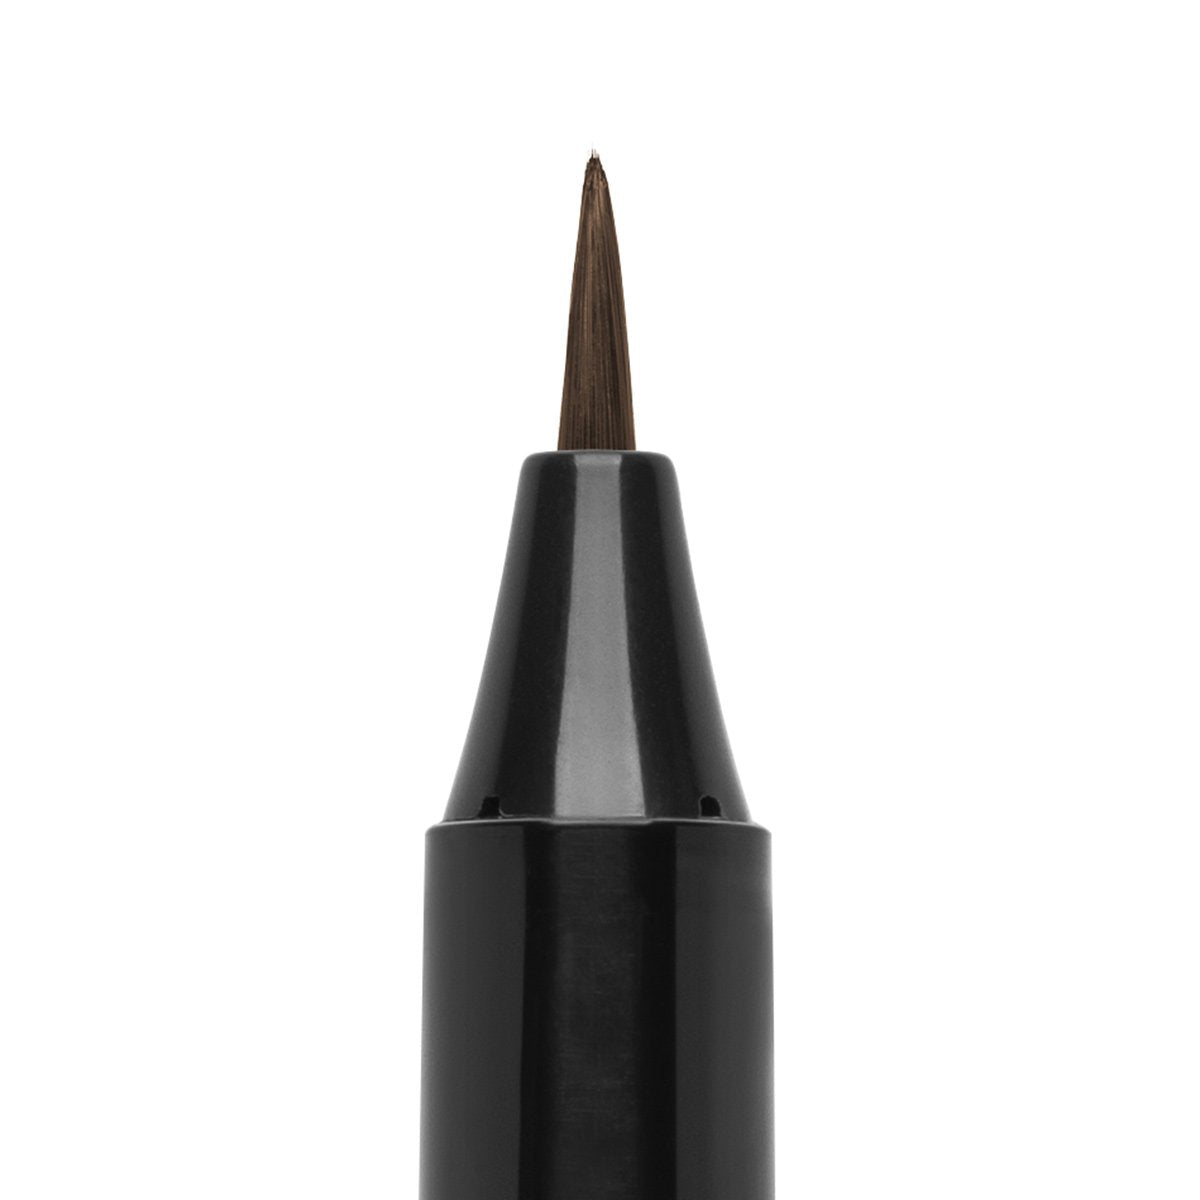 BRUN RICHE - RICH BROWN - long-wearing liquid eyeliner with precise brush tip in brown shade